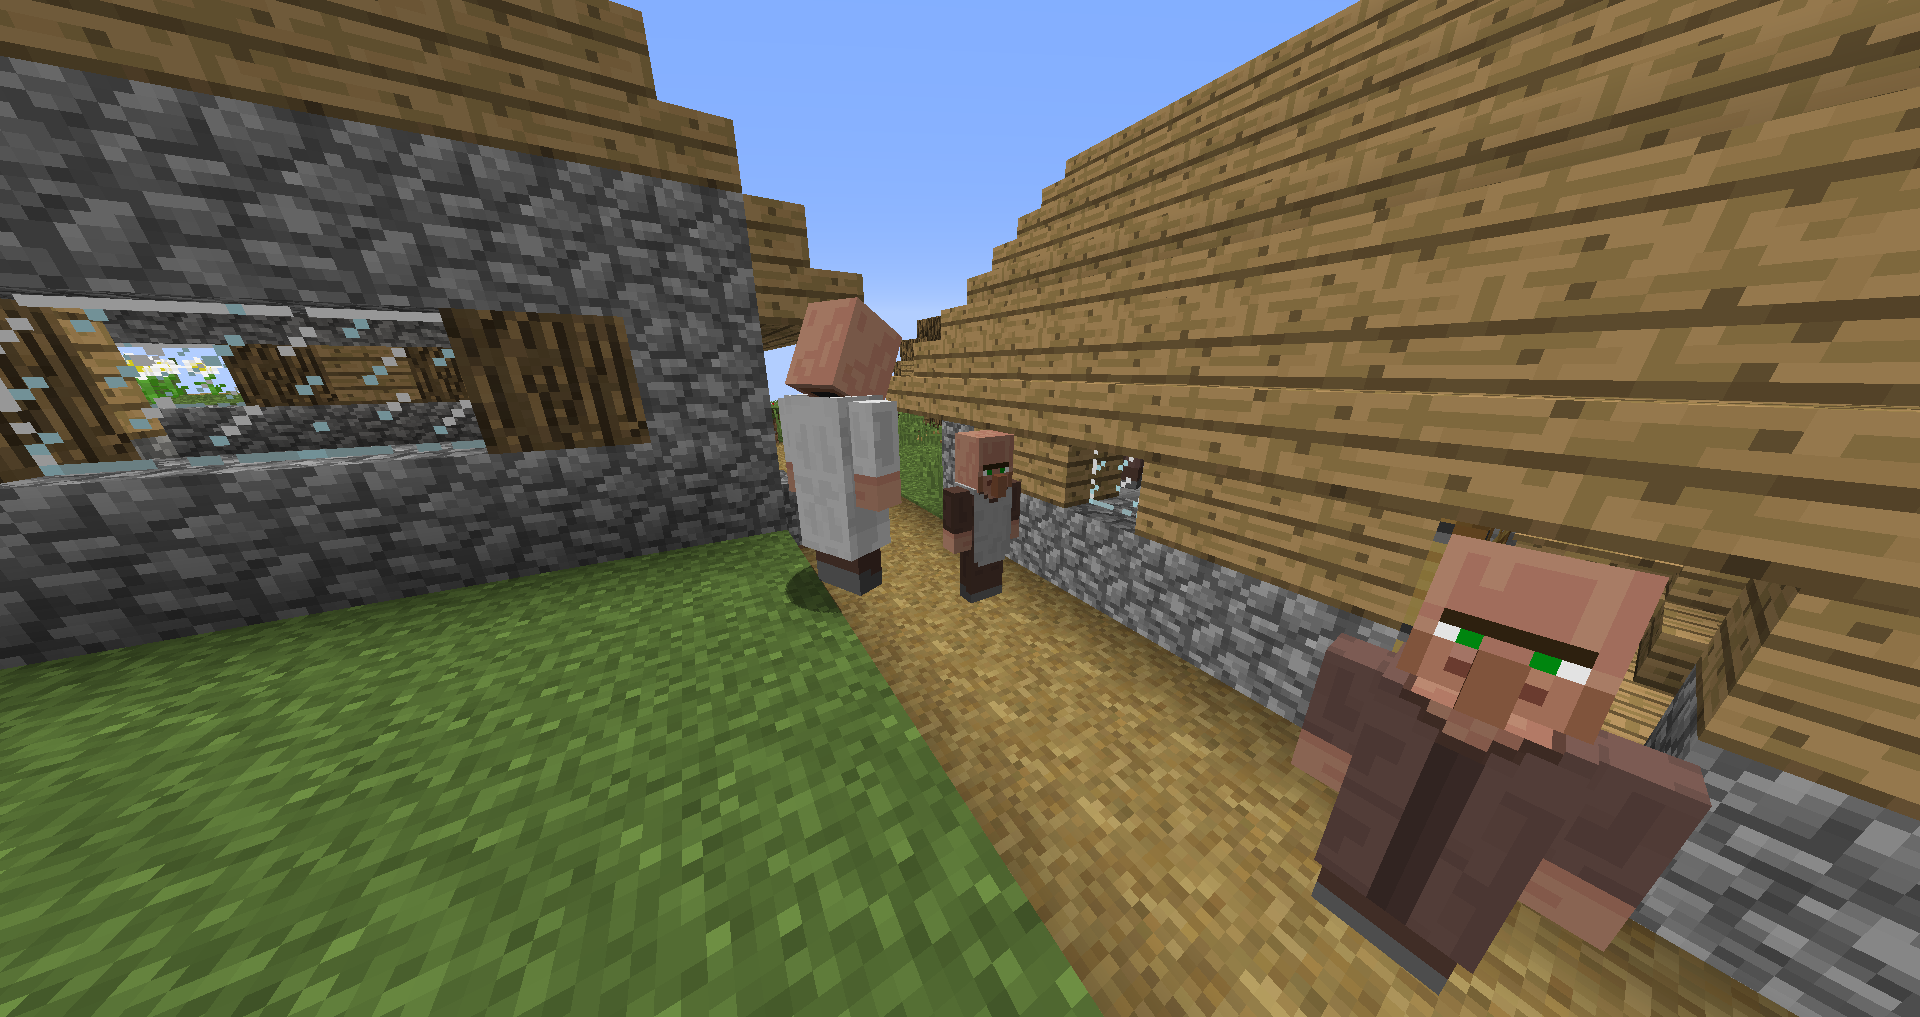 Villagers in their wild biome